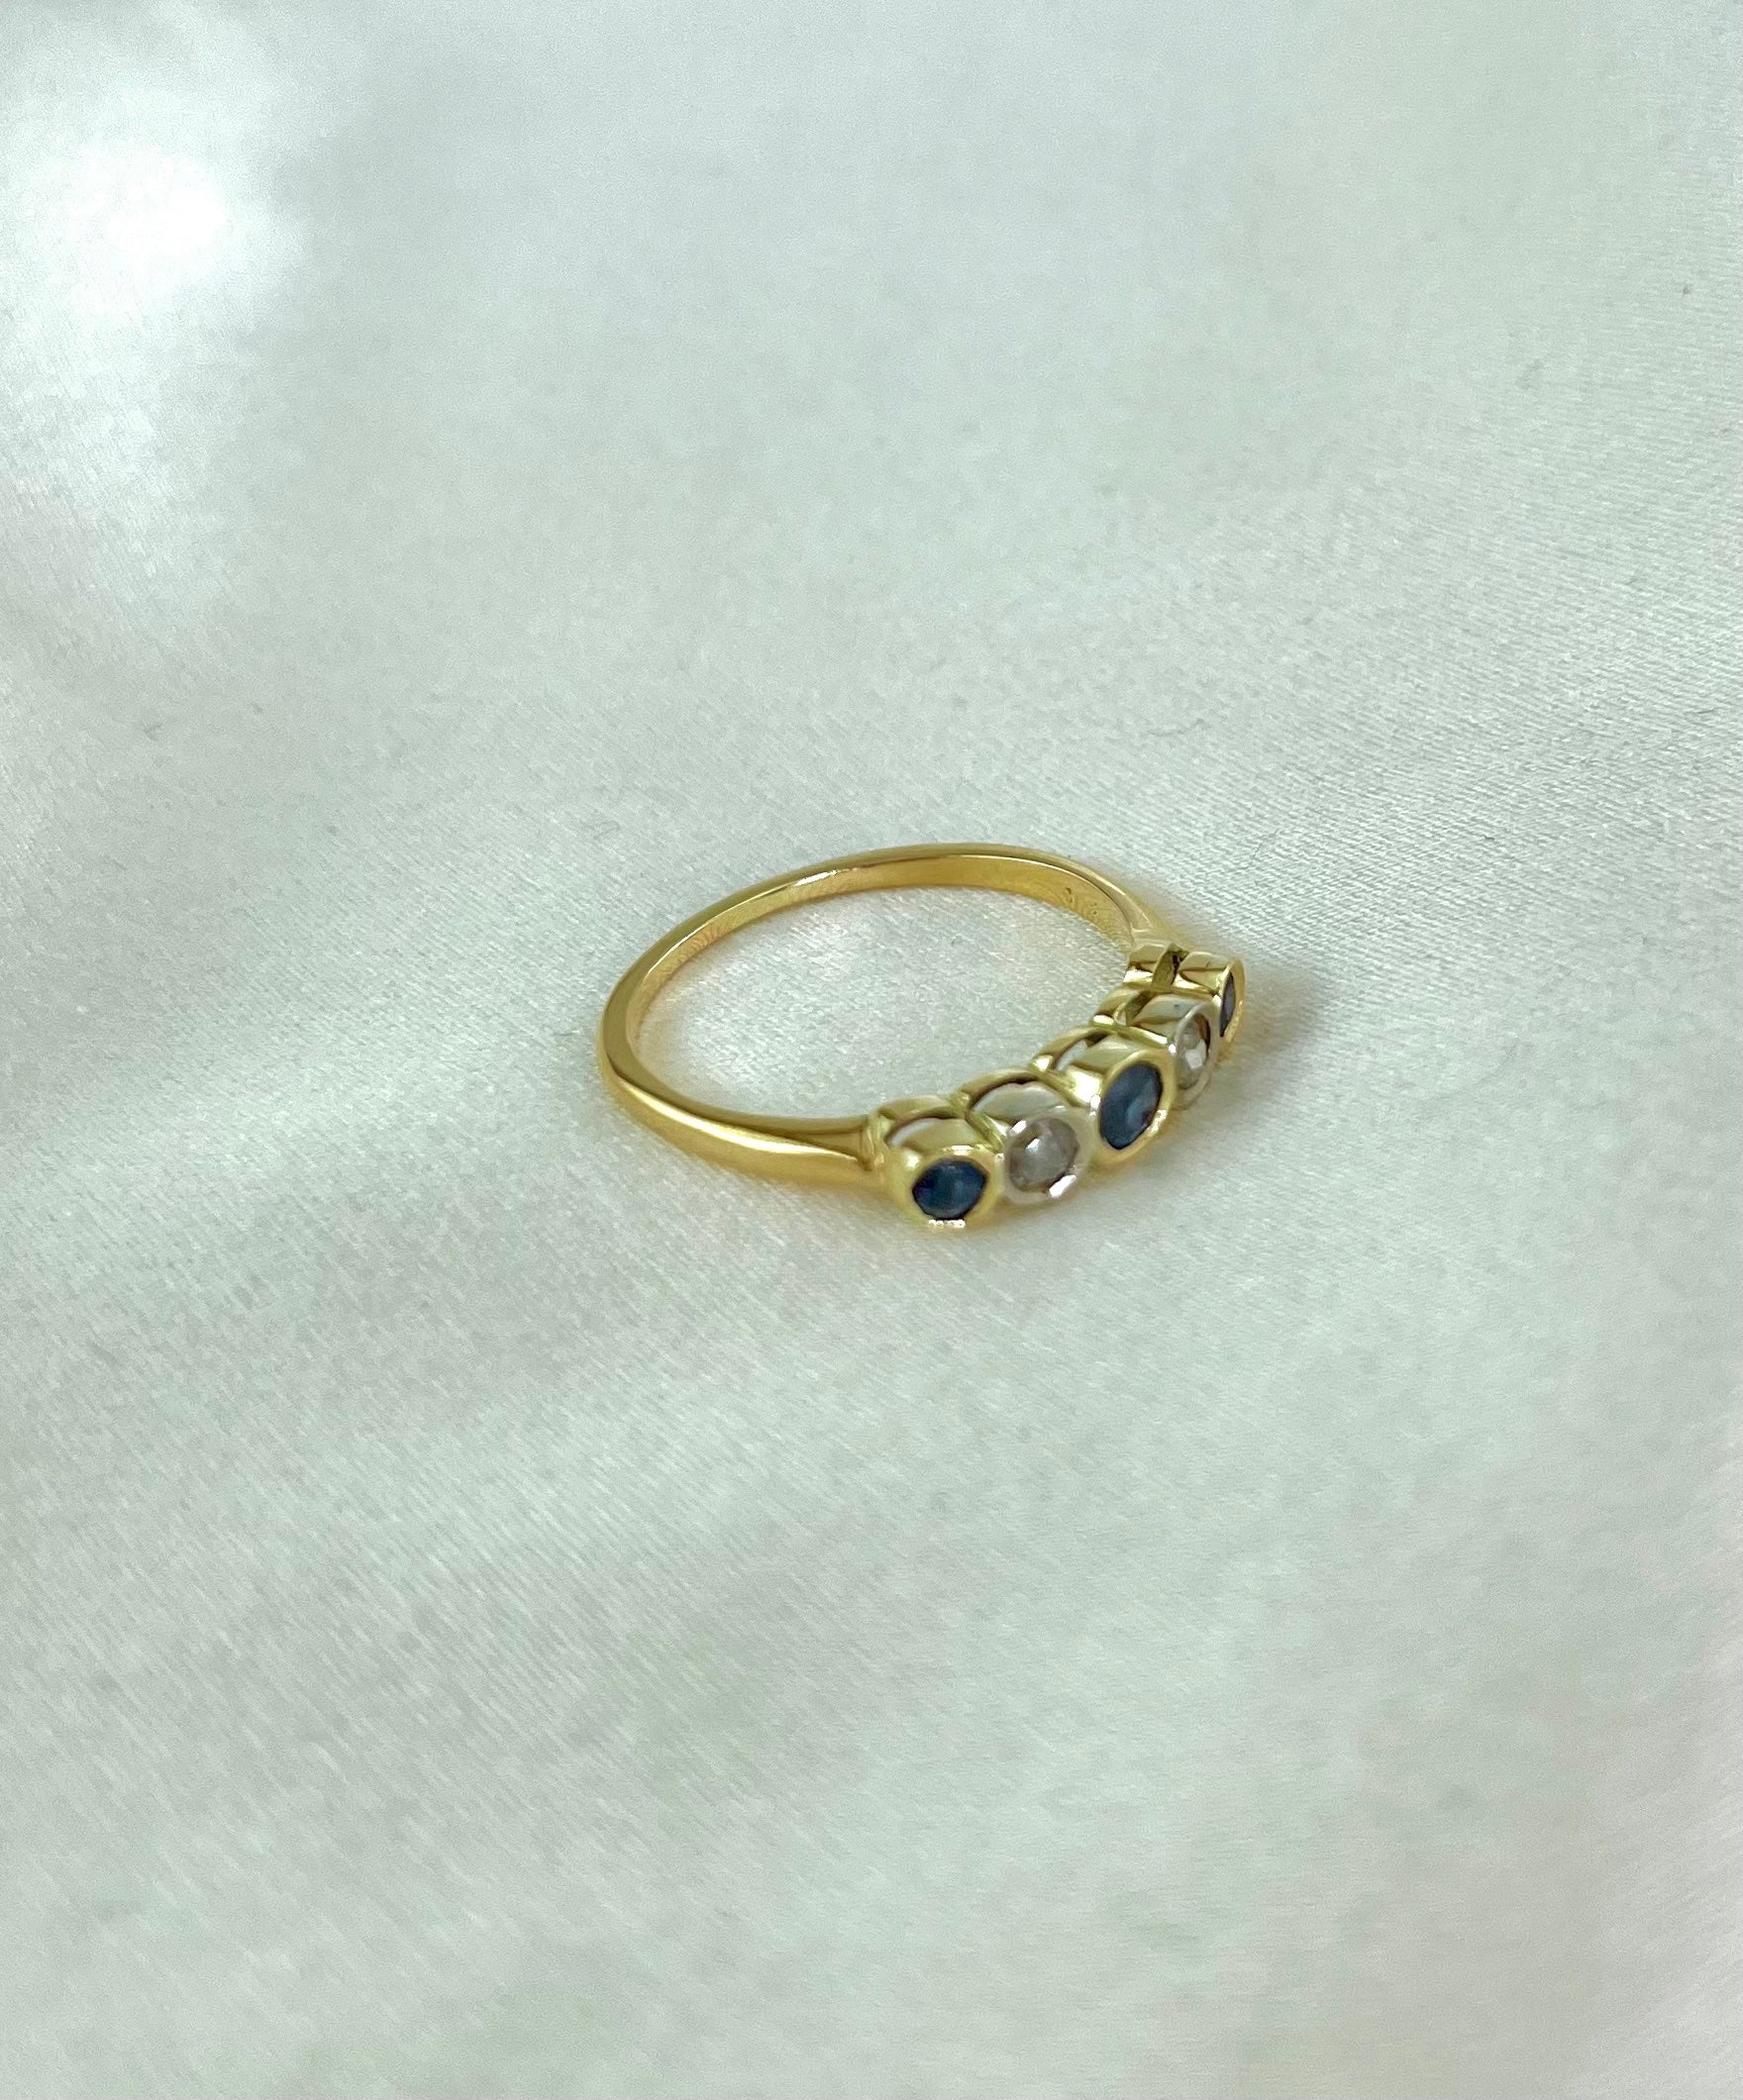 Vintage 18ct Yellow Gold 5 Stone Diamond and Sapphire Ring Size Q, Bezel Setting